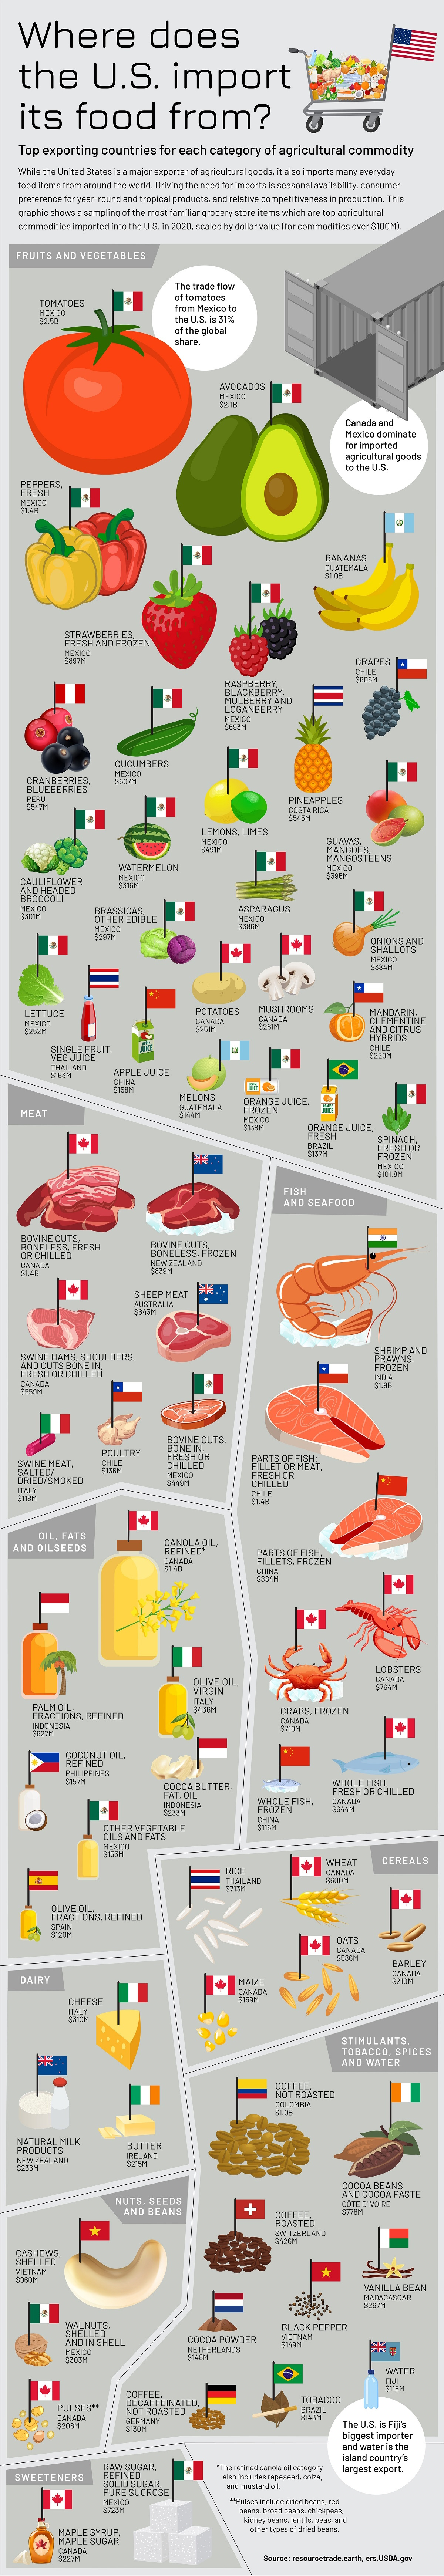 Top U.S. food imports from countries